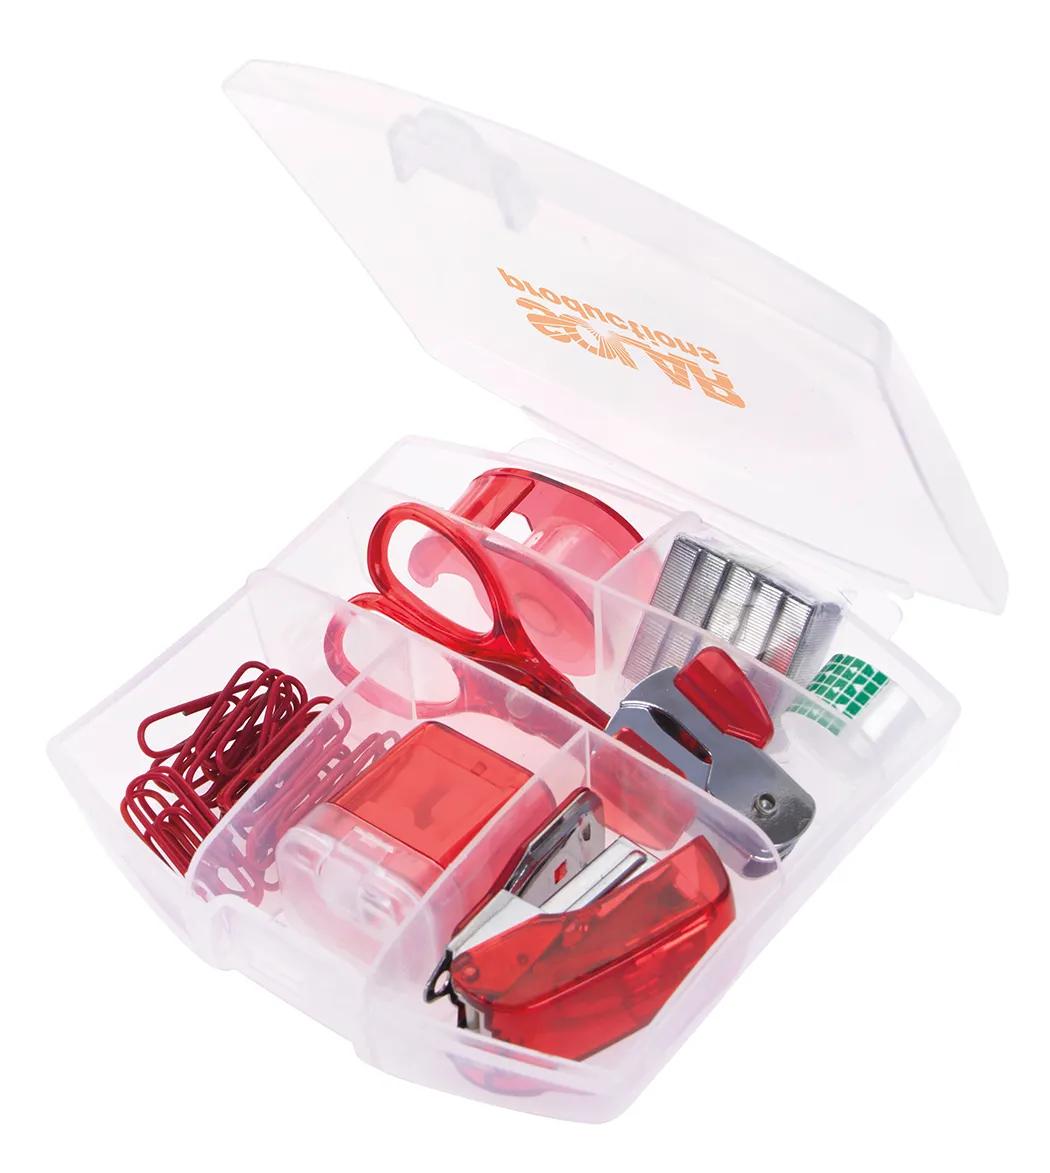 10-in-1 Office Supply Kit 4 of 20